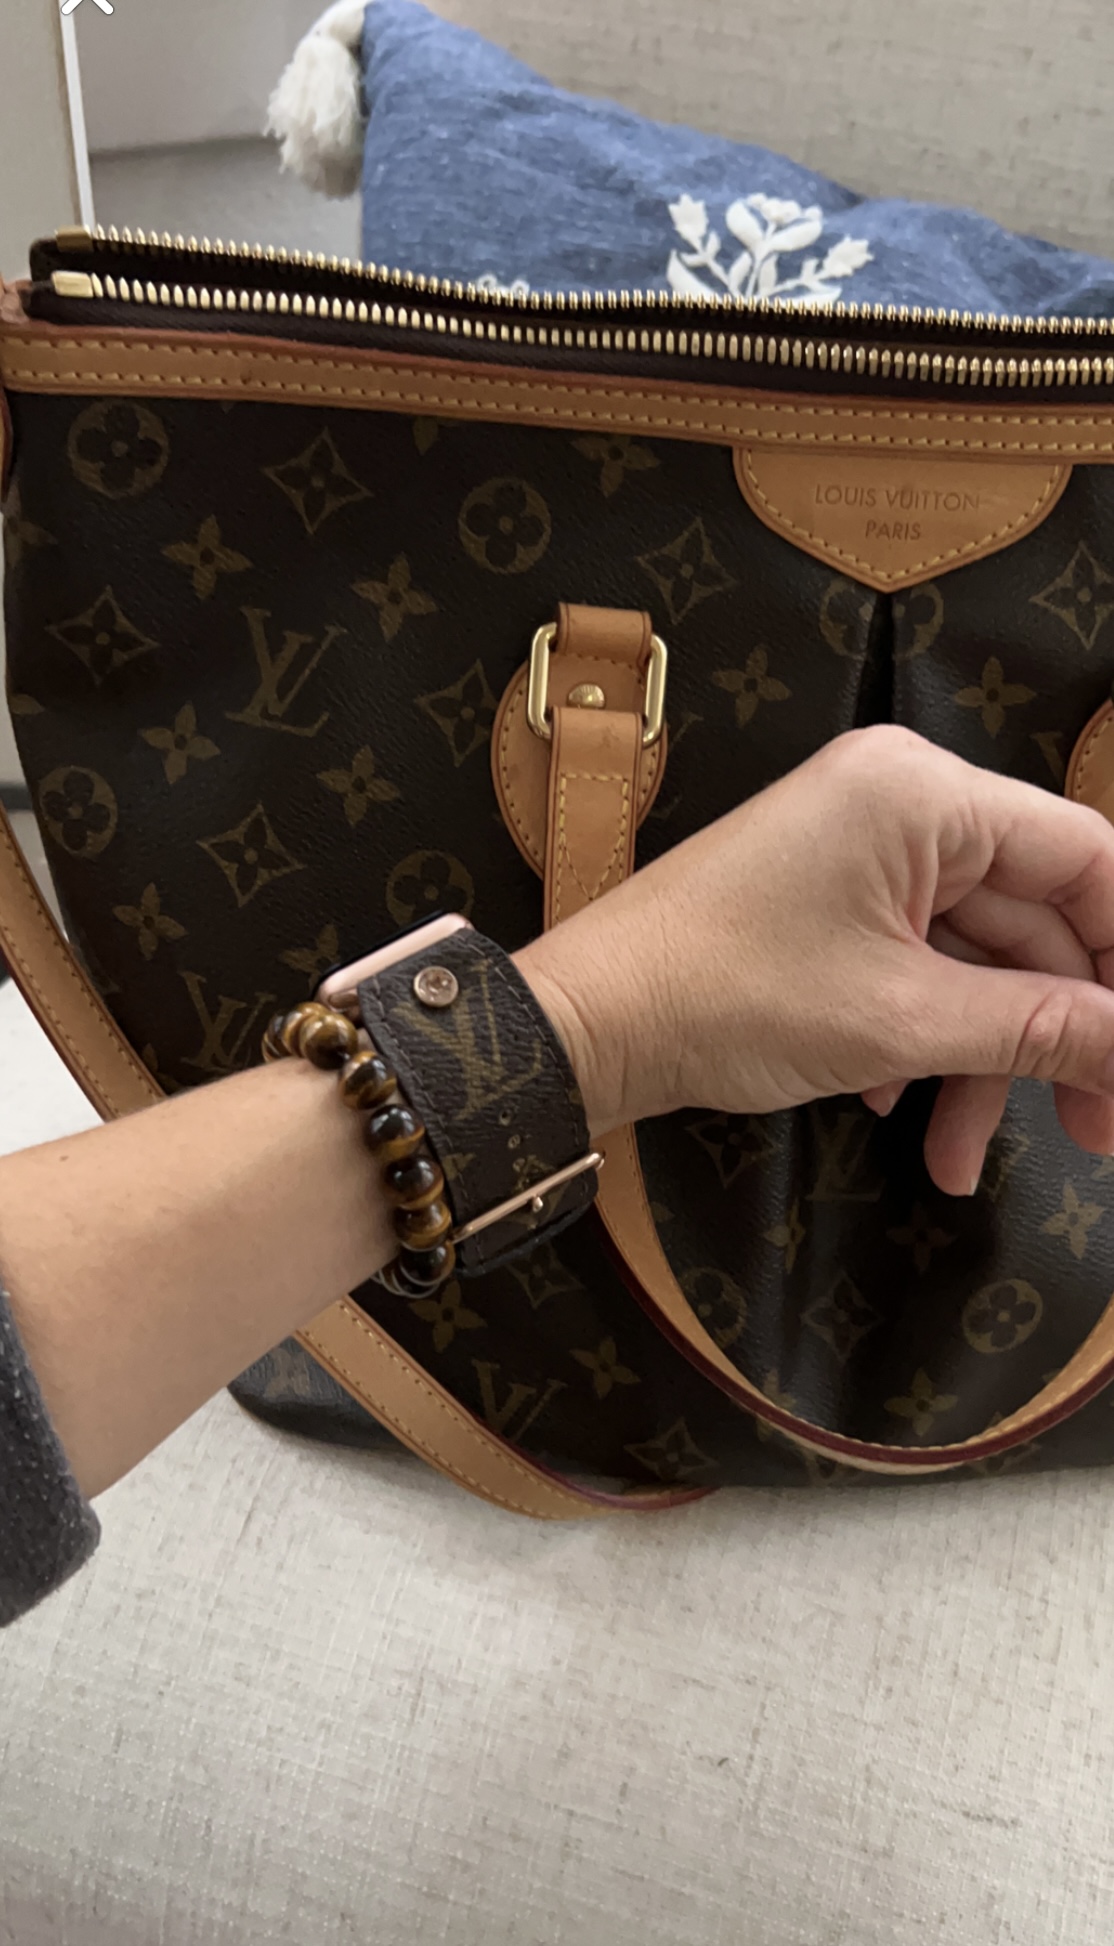 LOUIS VUITTON BAND - Apple Watch Band Review by SPARK'L BANDS 